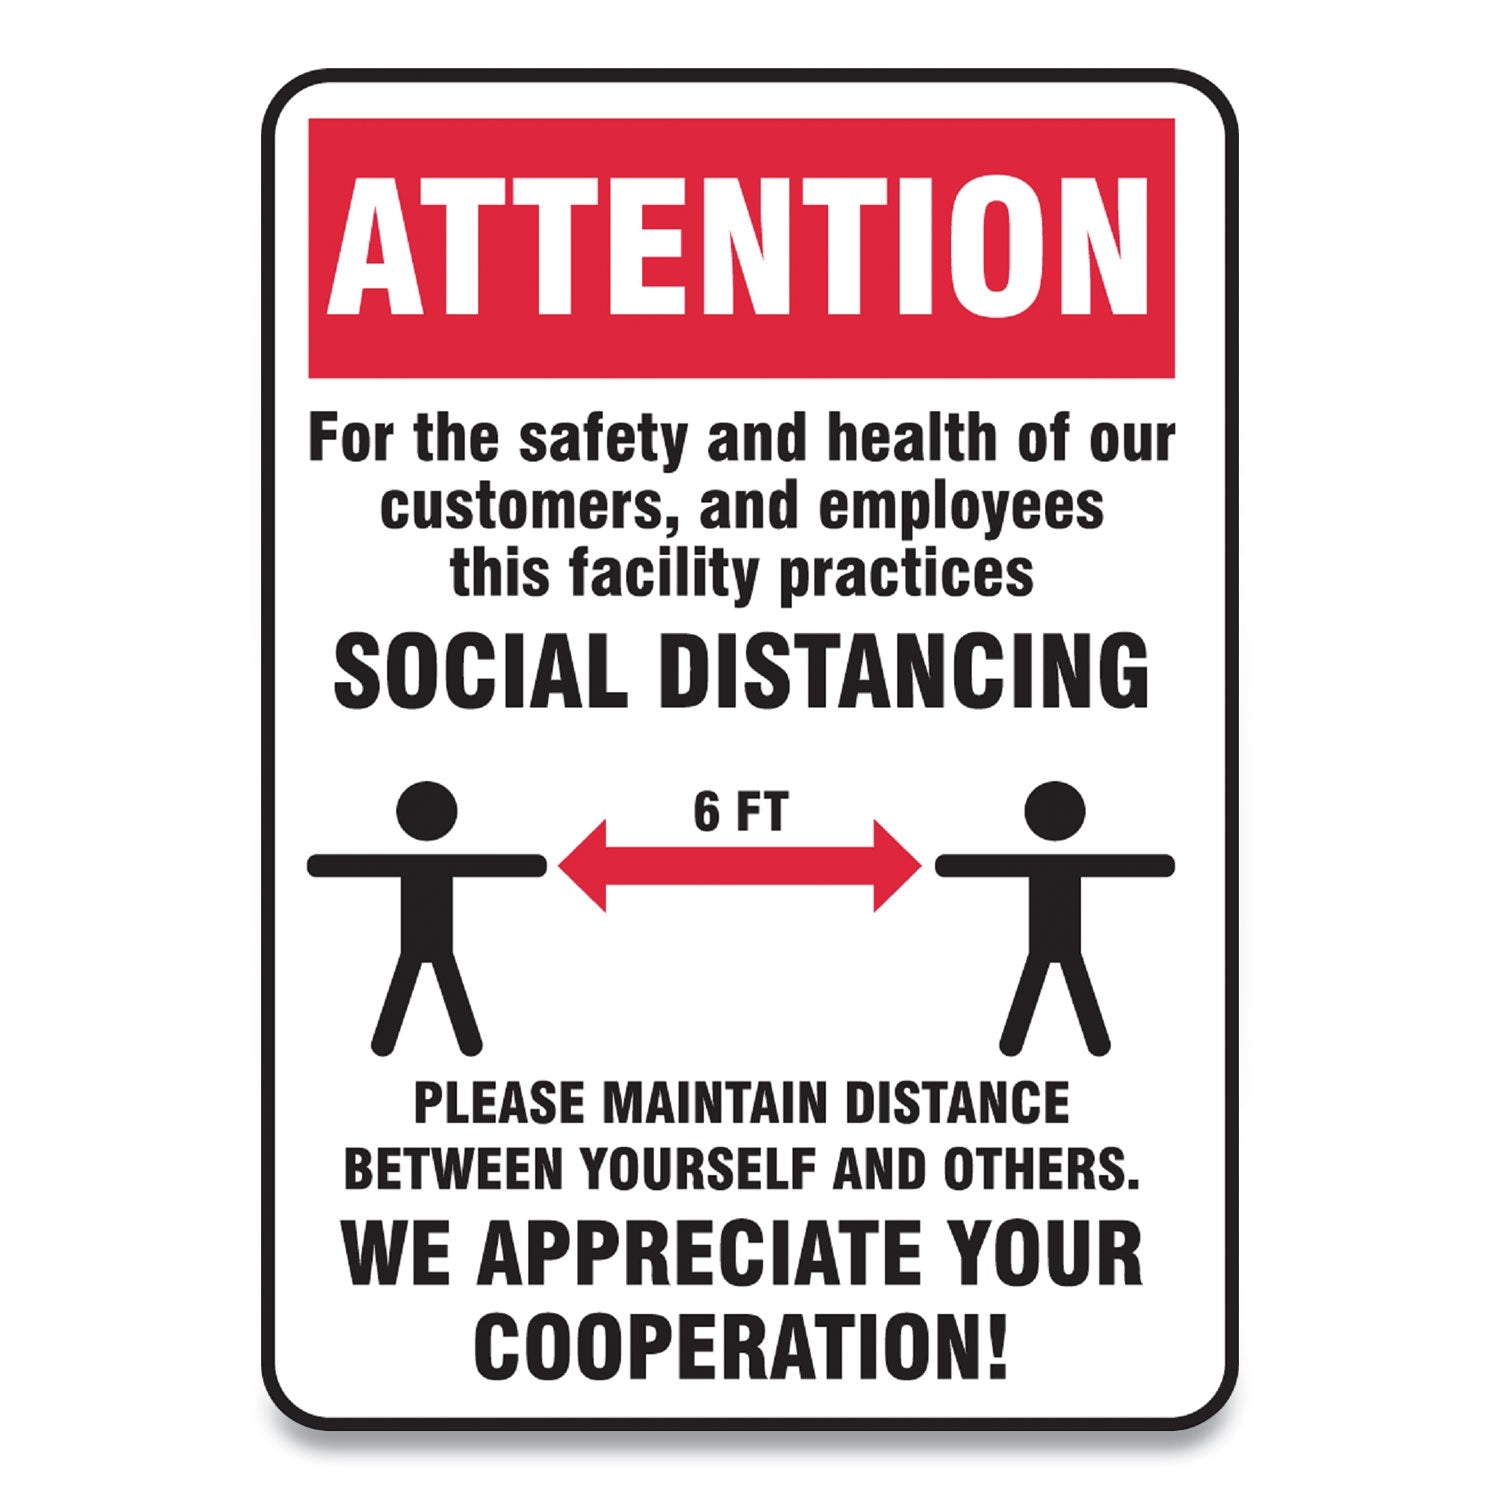 social-distance-signs-wall-7-x-10-customers-and-employees-distancing-humans-arrows-red-white-10-pack_gn1mgng901vpesp - 1